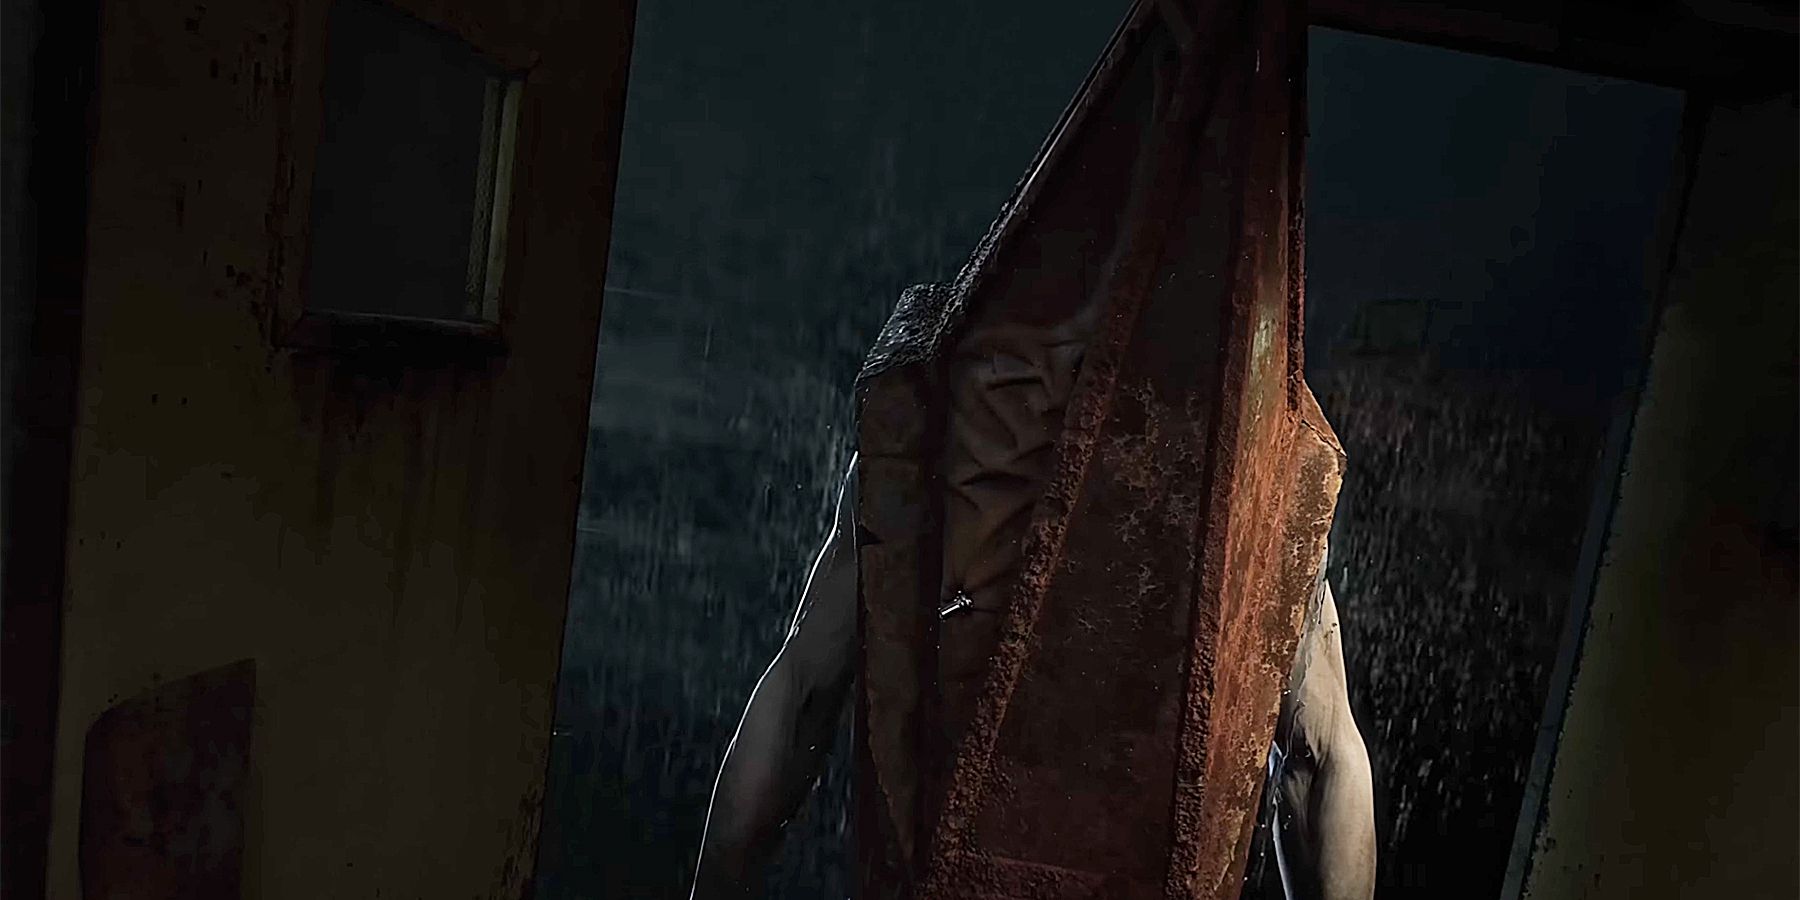 Silent Hill 2 remake finally announced: Platforms and more